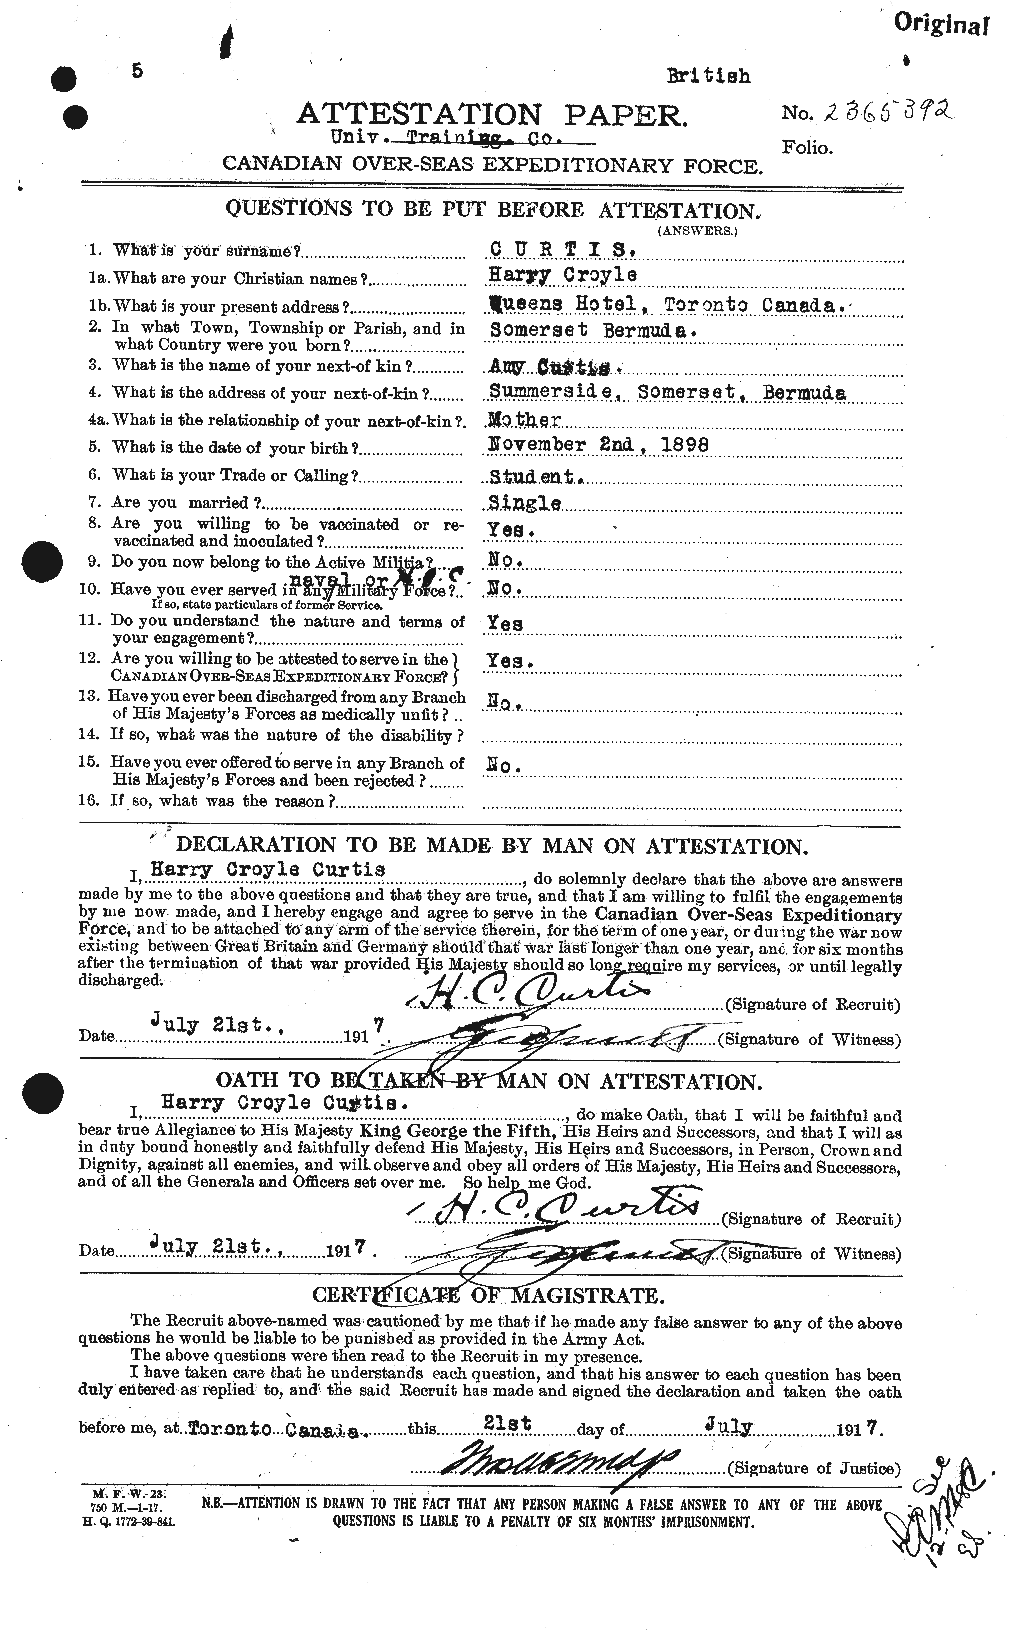 Personnel Records of the First World War - CEF 072196a